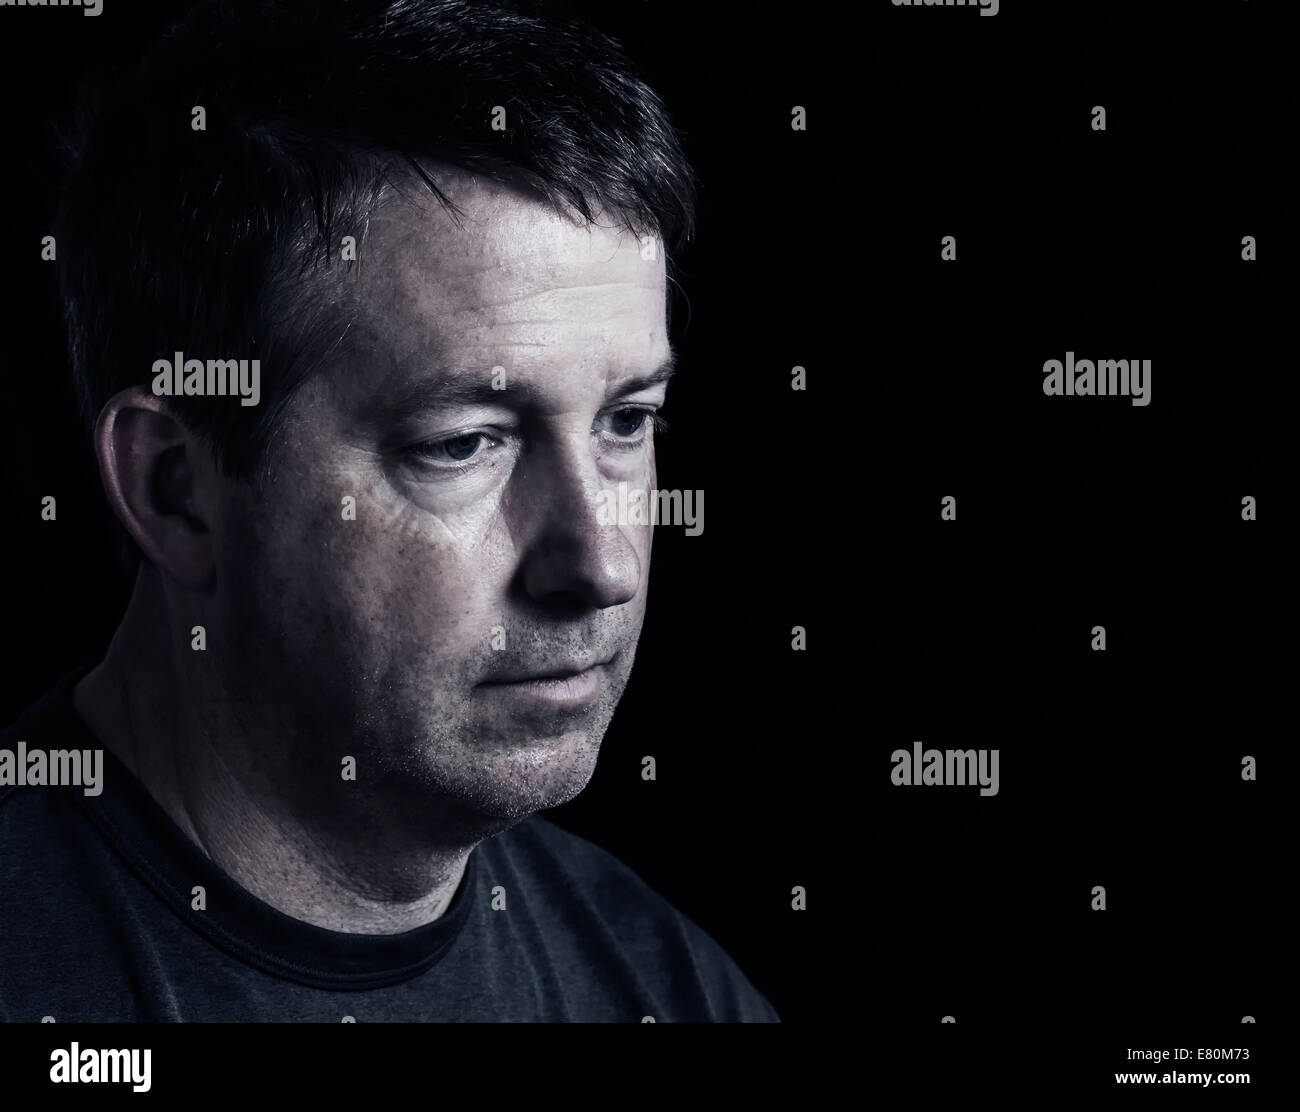 Side view close up of mature man showing negative emotions with dark background Stock Photo